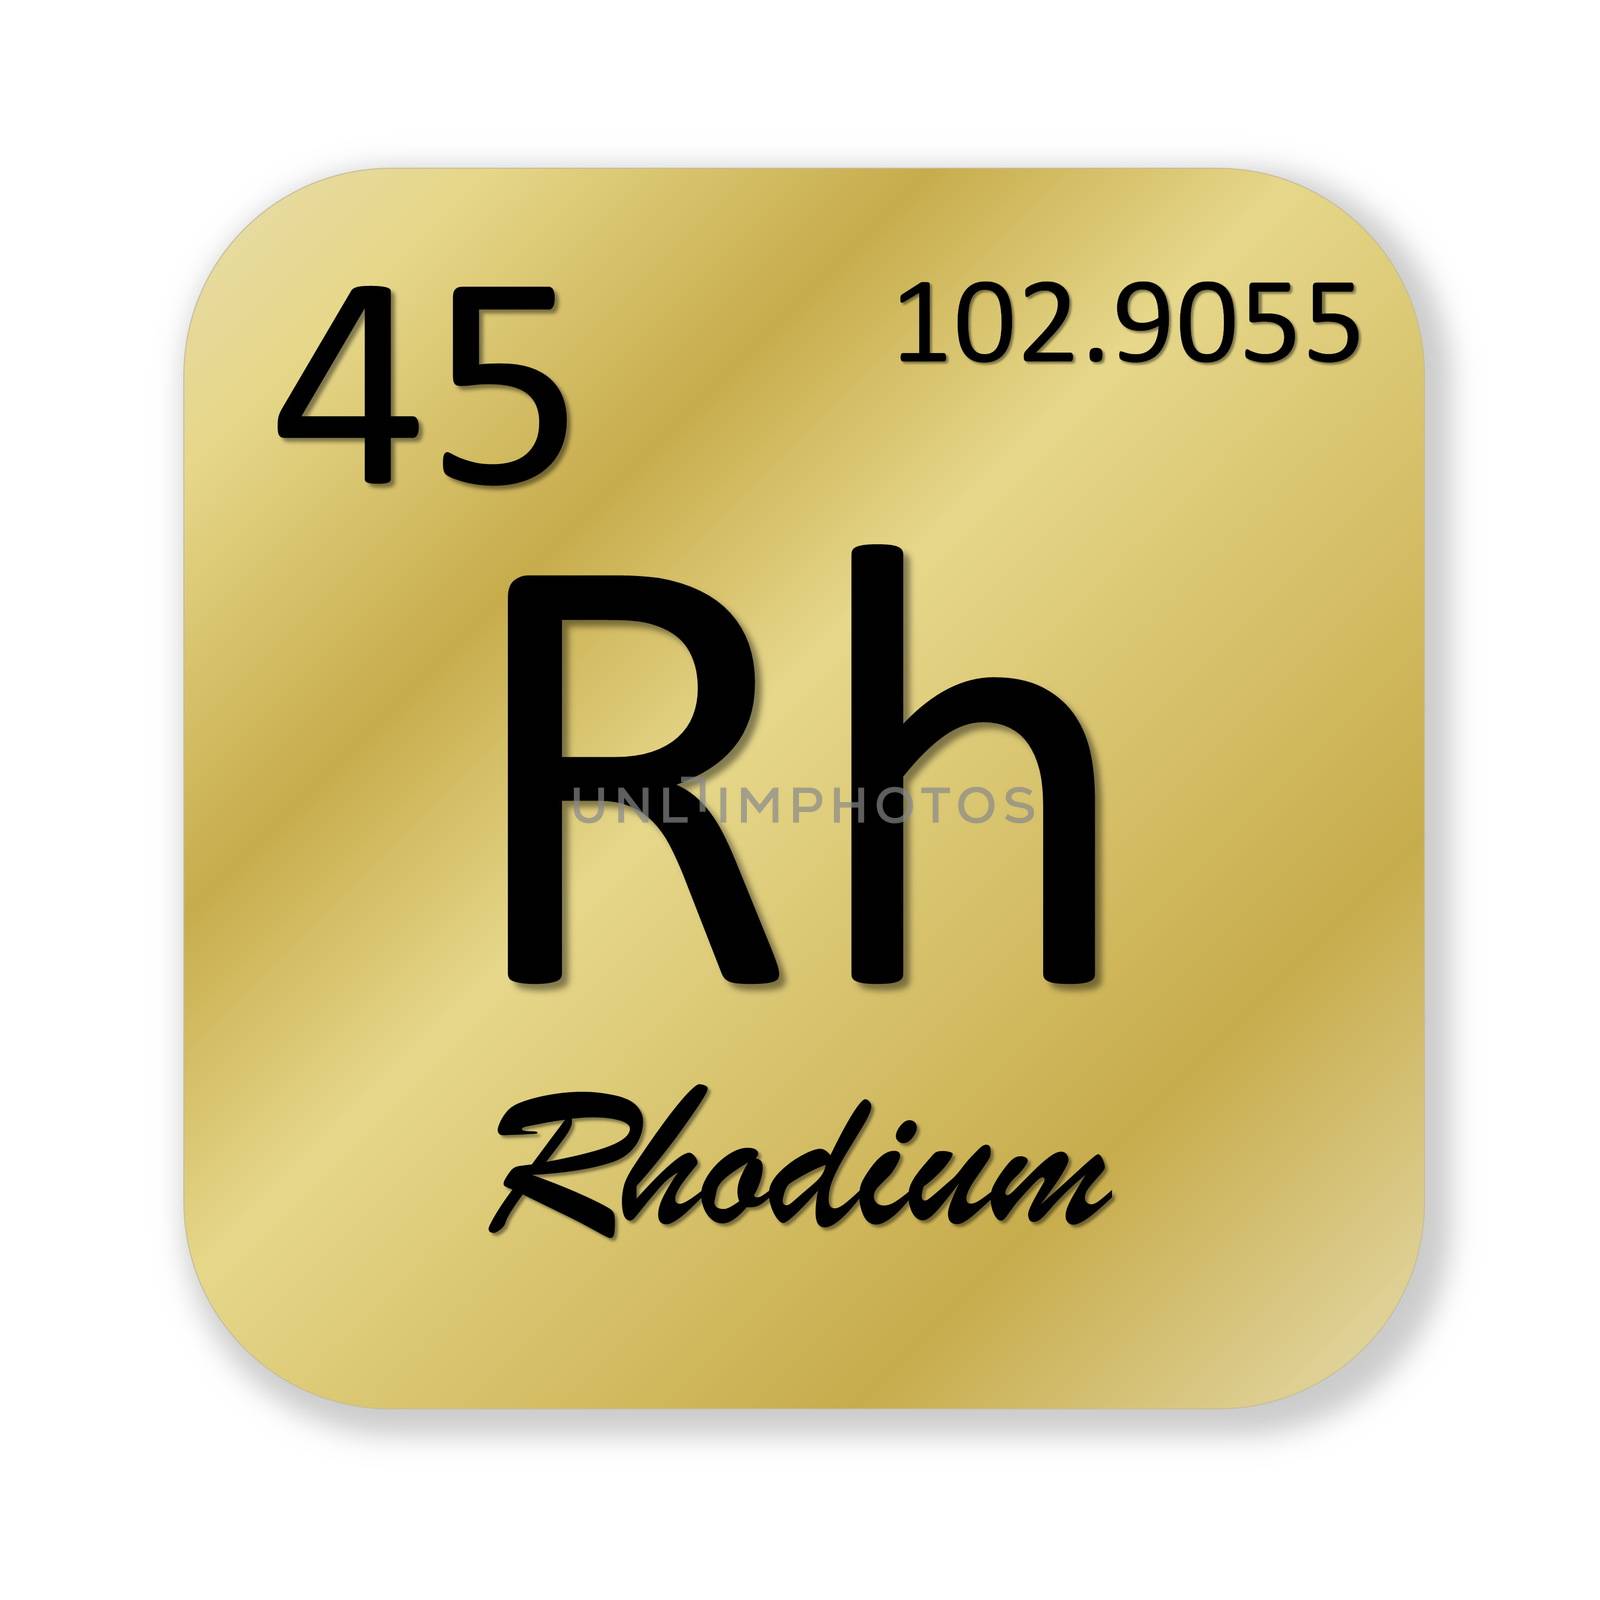 Black rhodium element into golden square shape isolated in white background